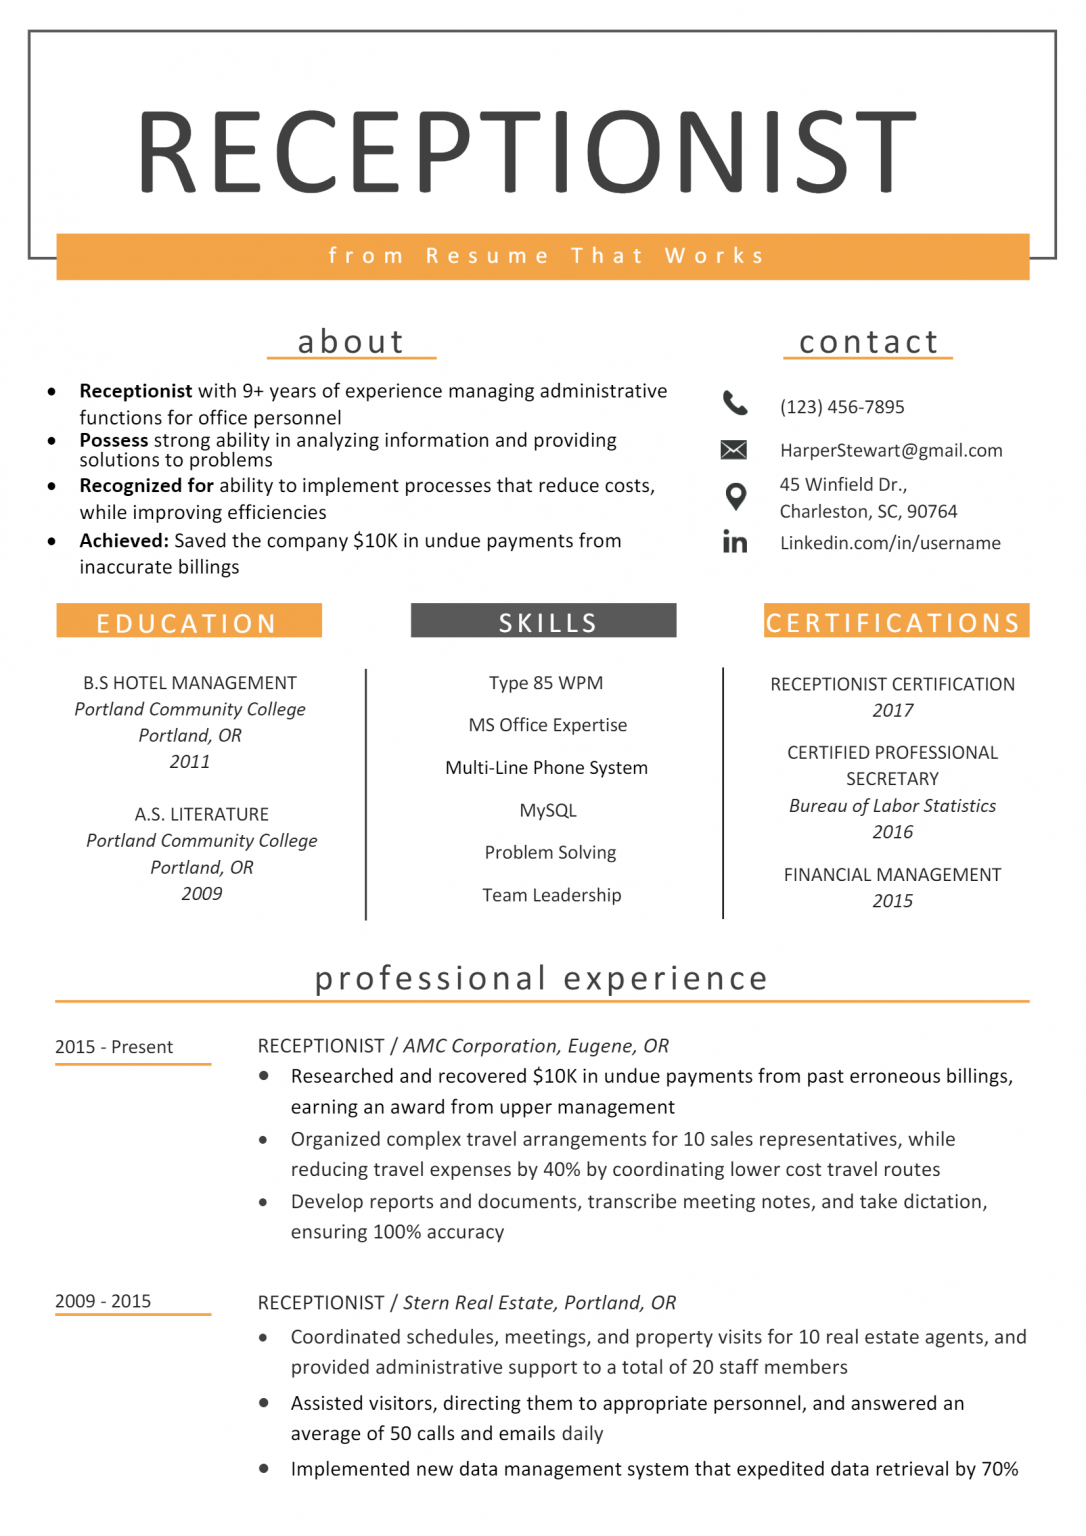 resume for receptionist in word format download